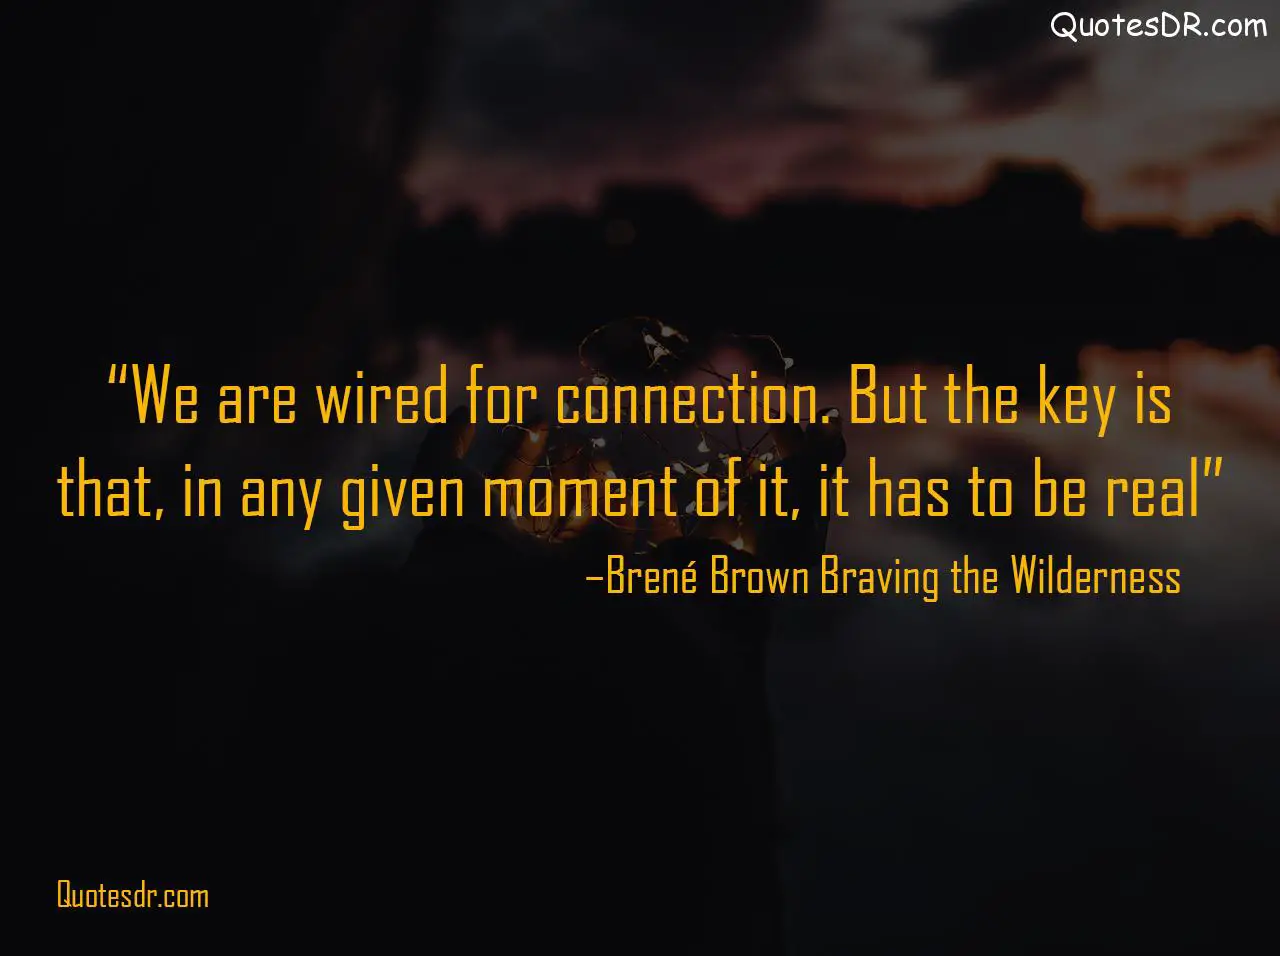 Braving the Wilderness Quotes